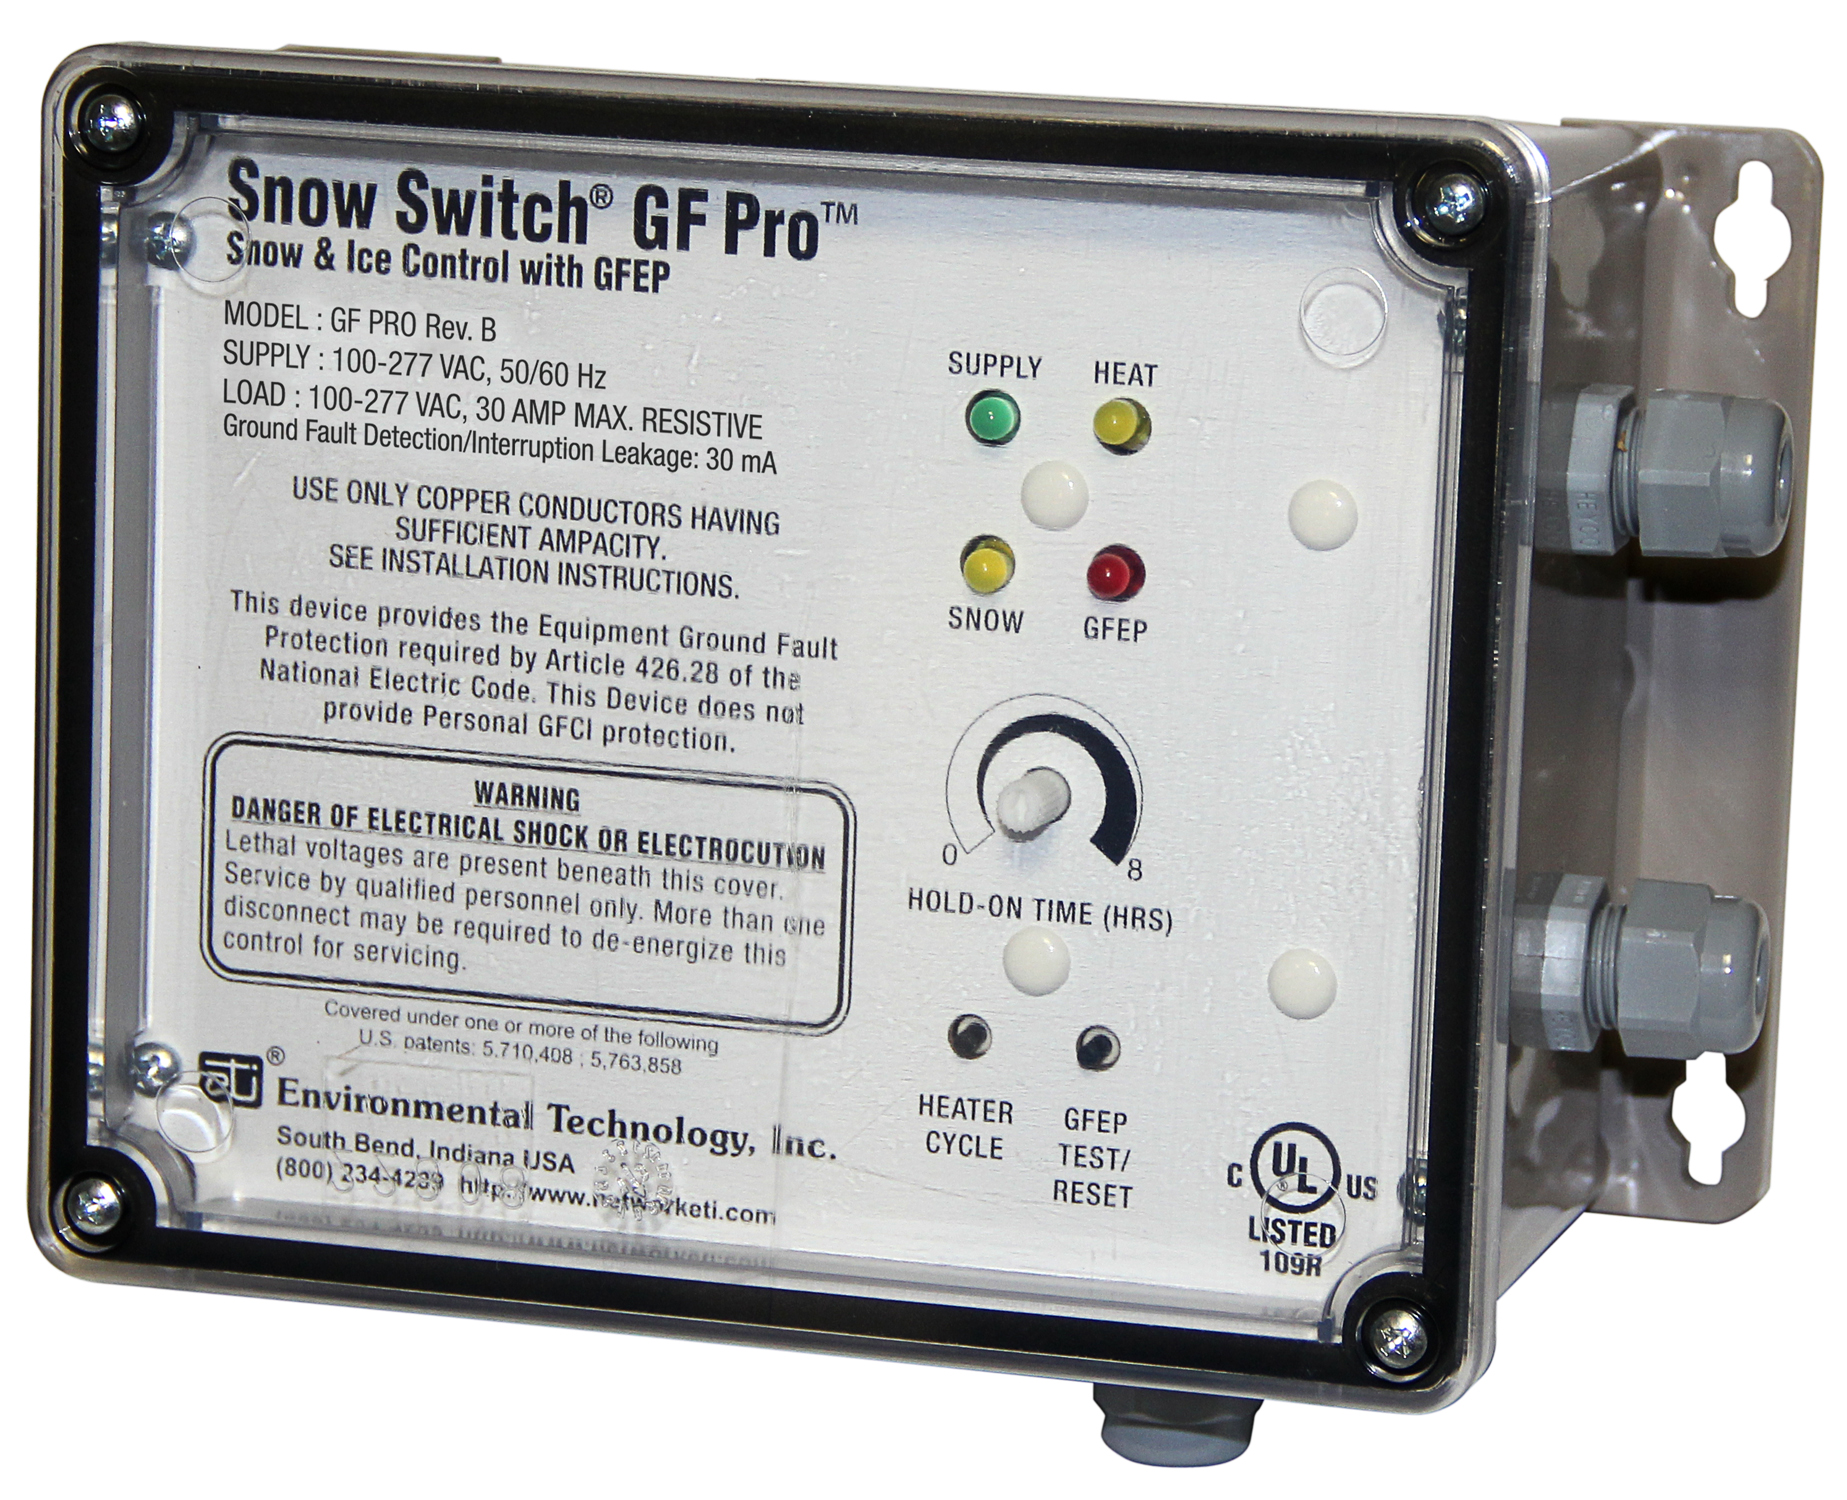 The Snow Switch® Model GF Pro uses separate snow and ice sensors to regulate roof heater systems.